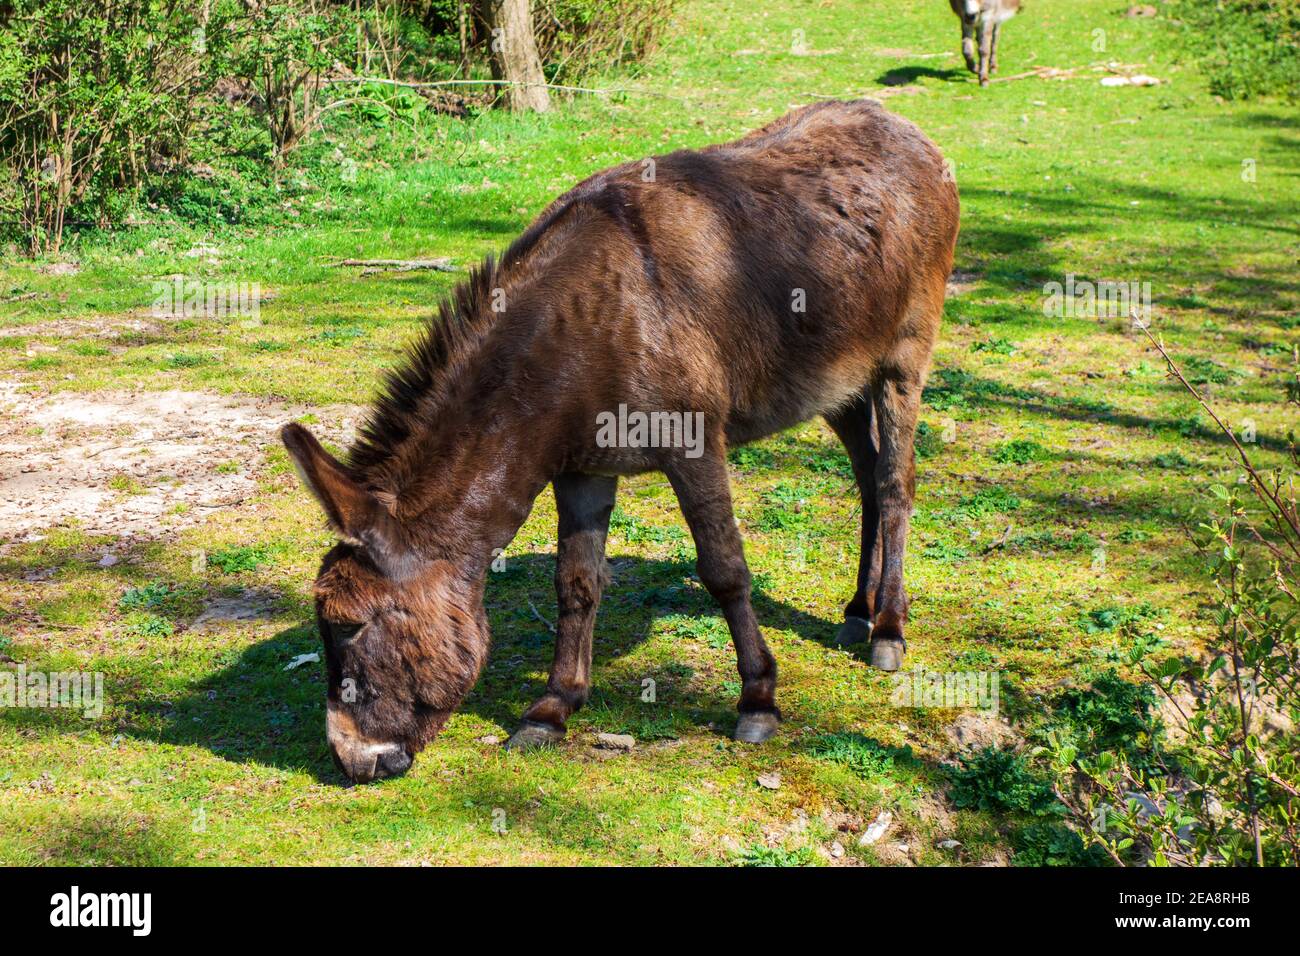 Close up of a brown donkey Stock Photo